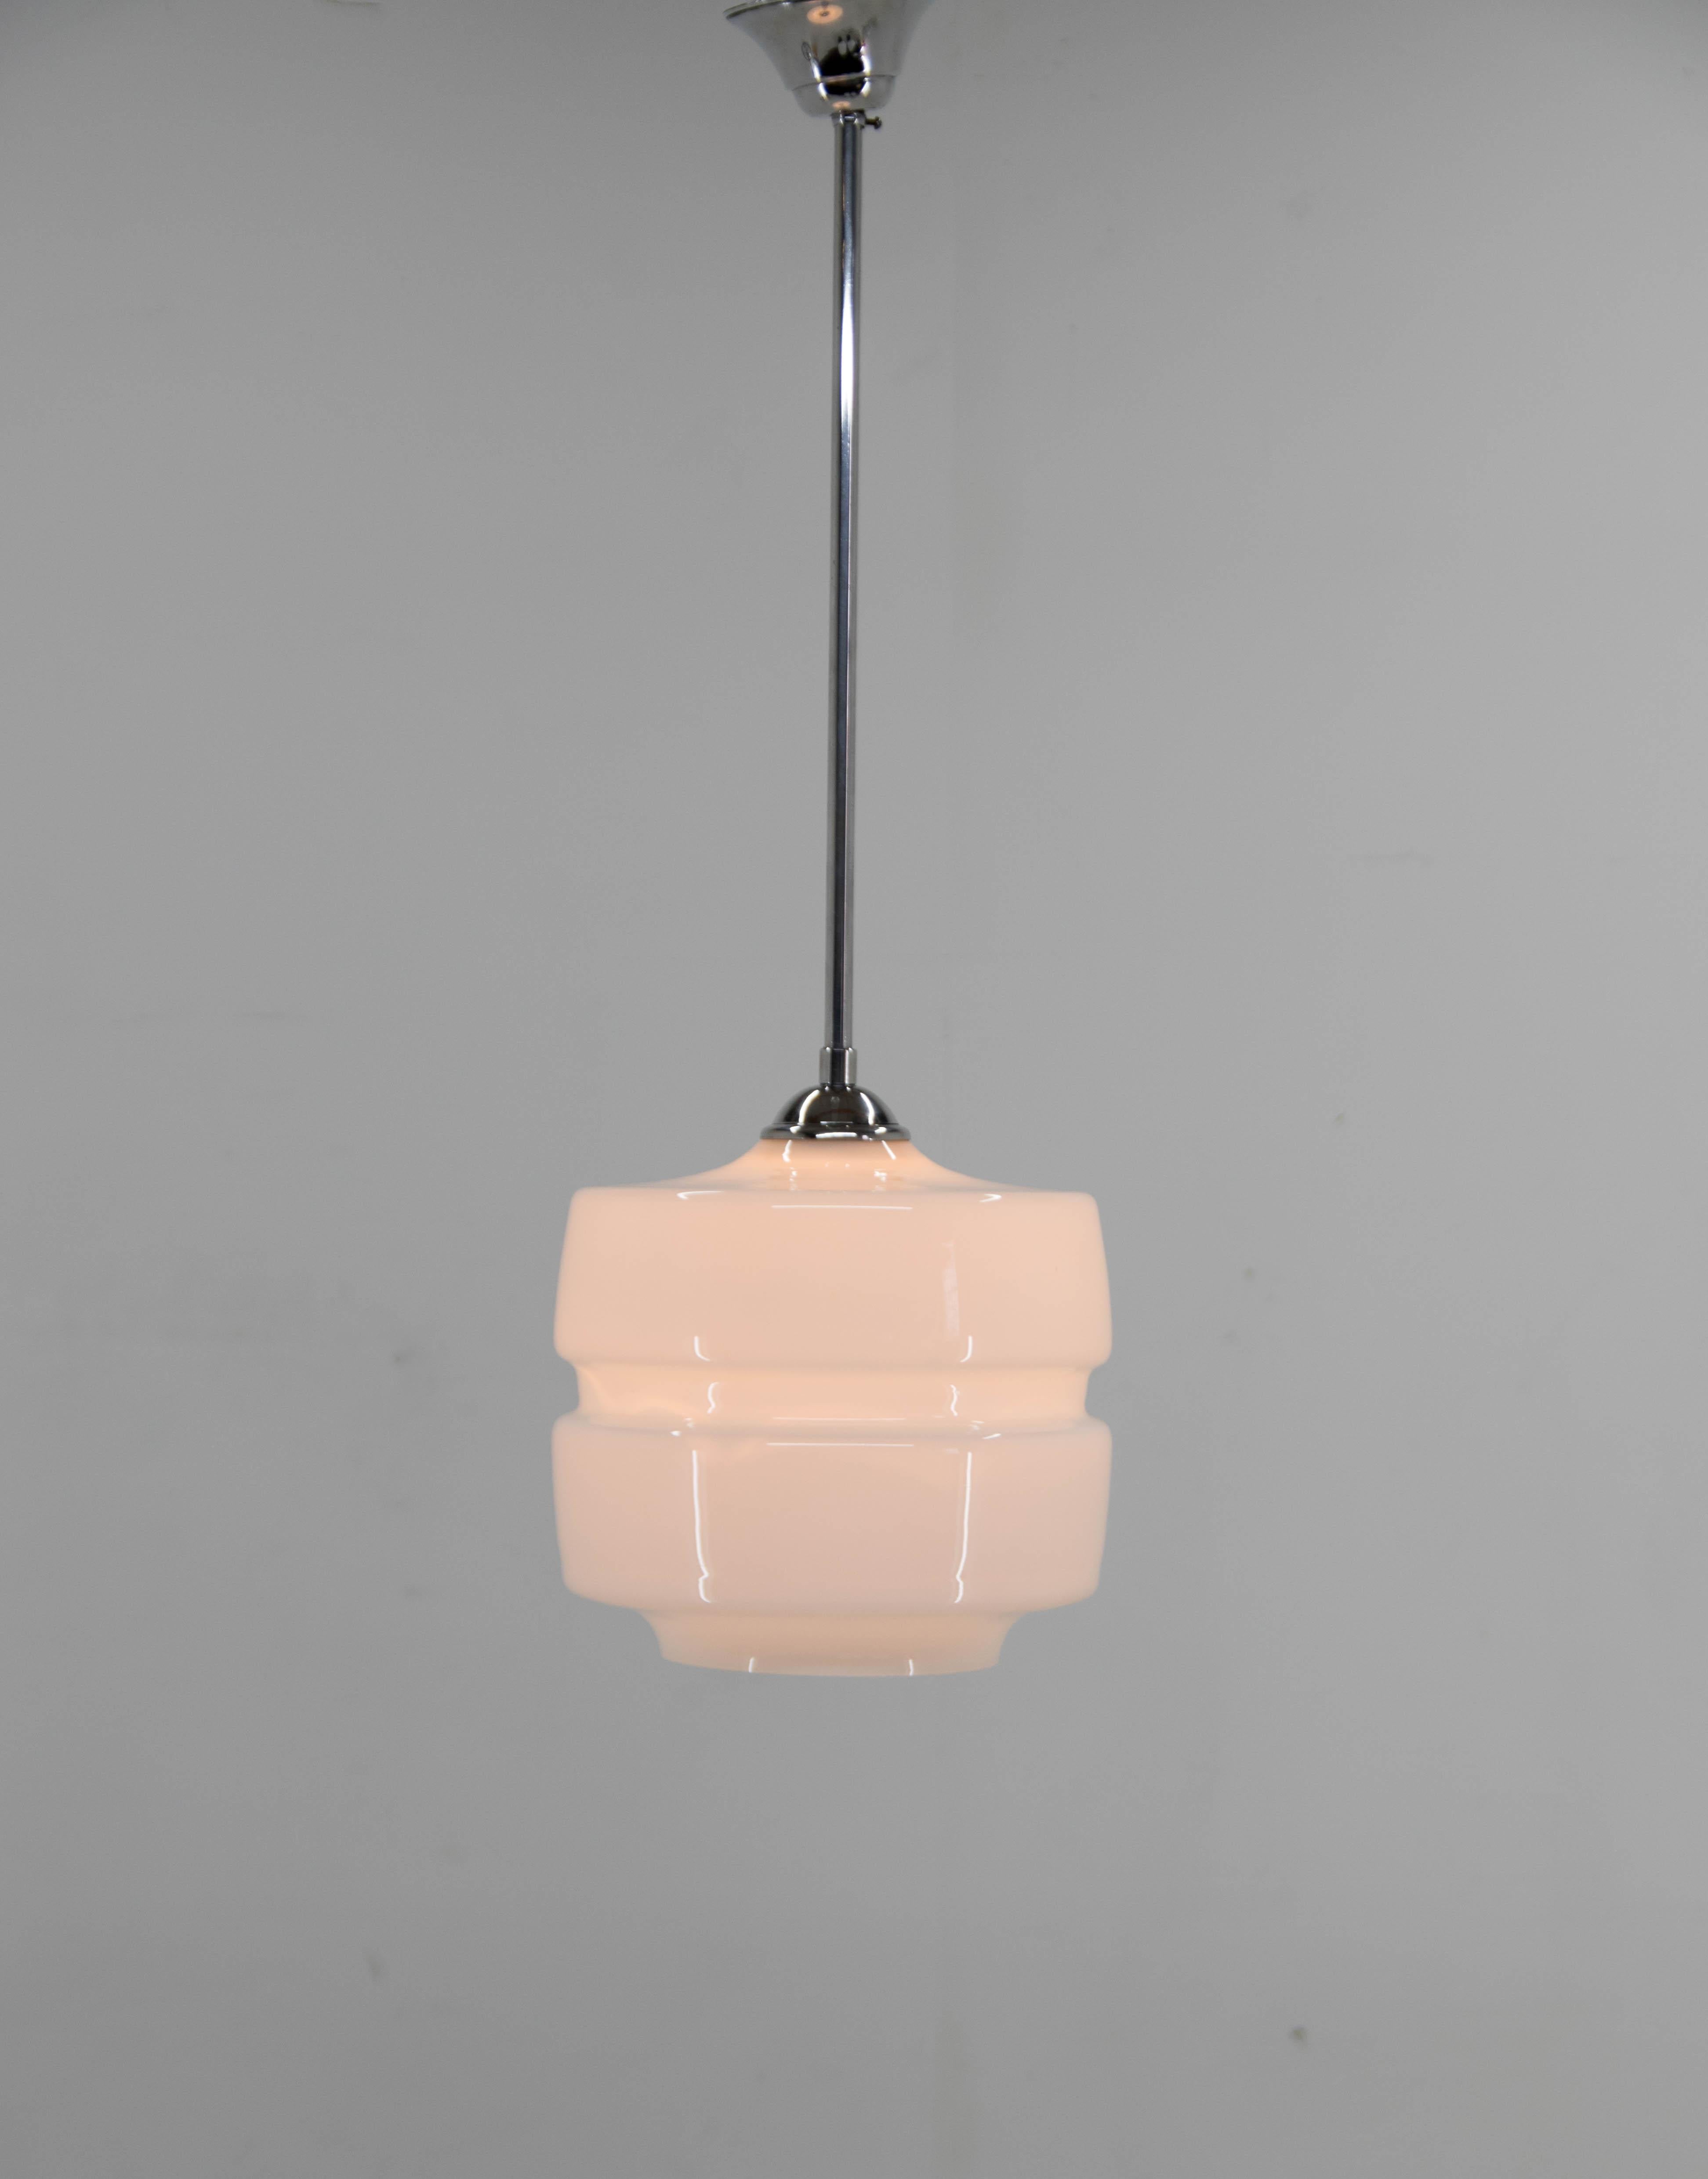 Made in Czechoslovakia in 1960s. Blown opaline glass shade without any damage.
Central rod can be shorten on request.
Two items available
Rewired: 1x100W? E25-E27 bulb
US wiring compatible
Shipping quote to US on request.